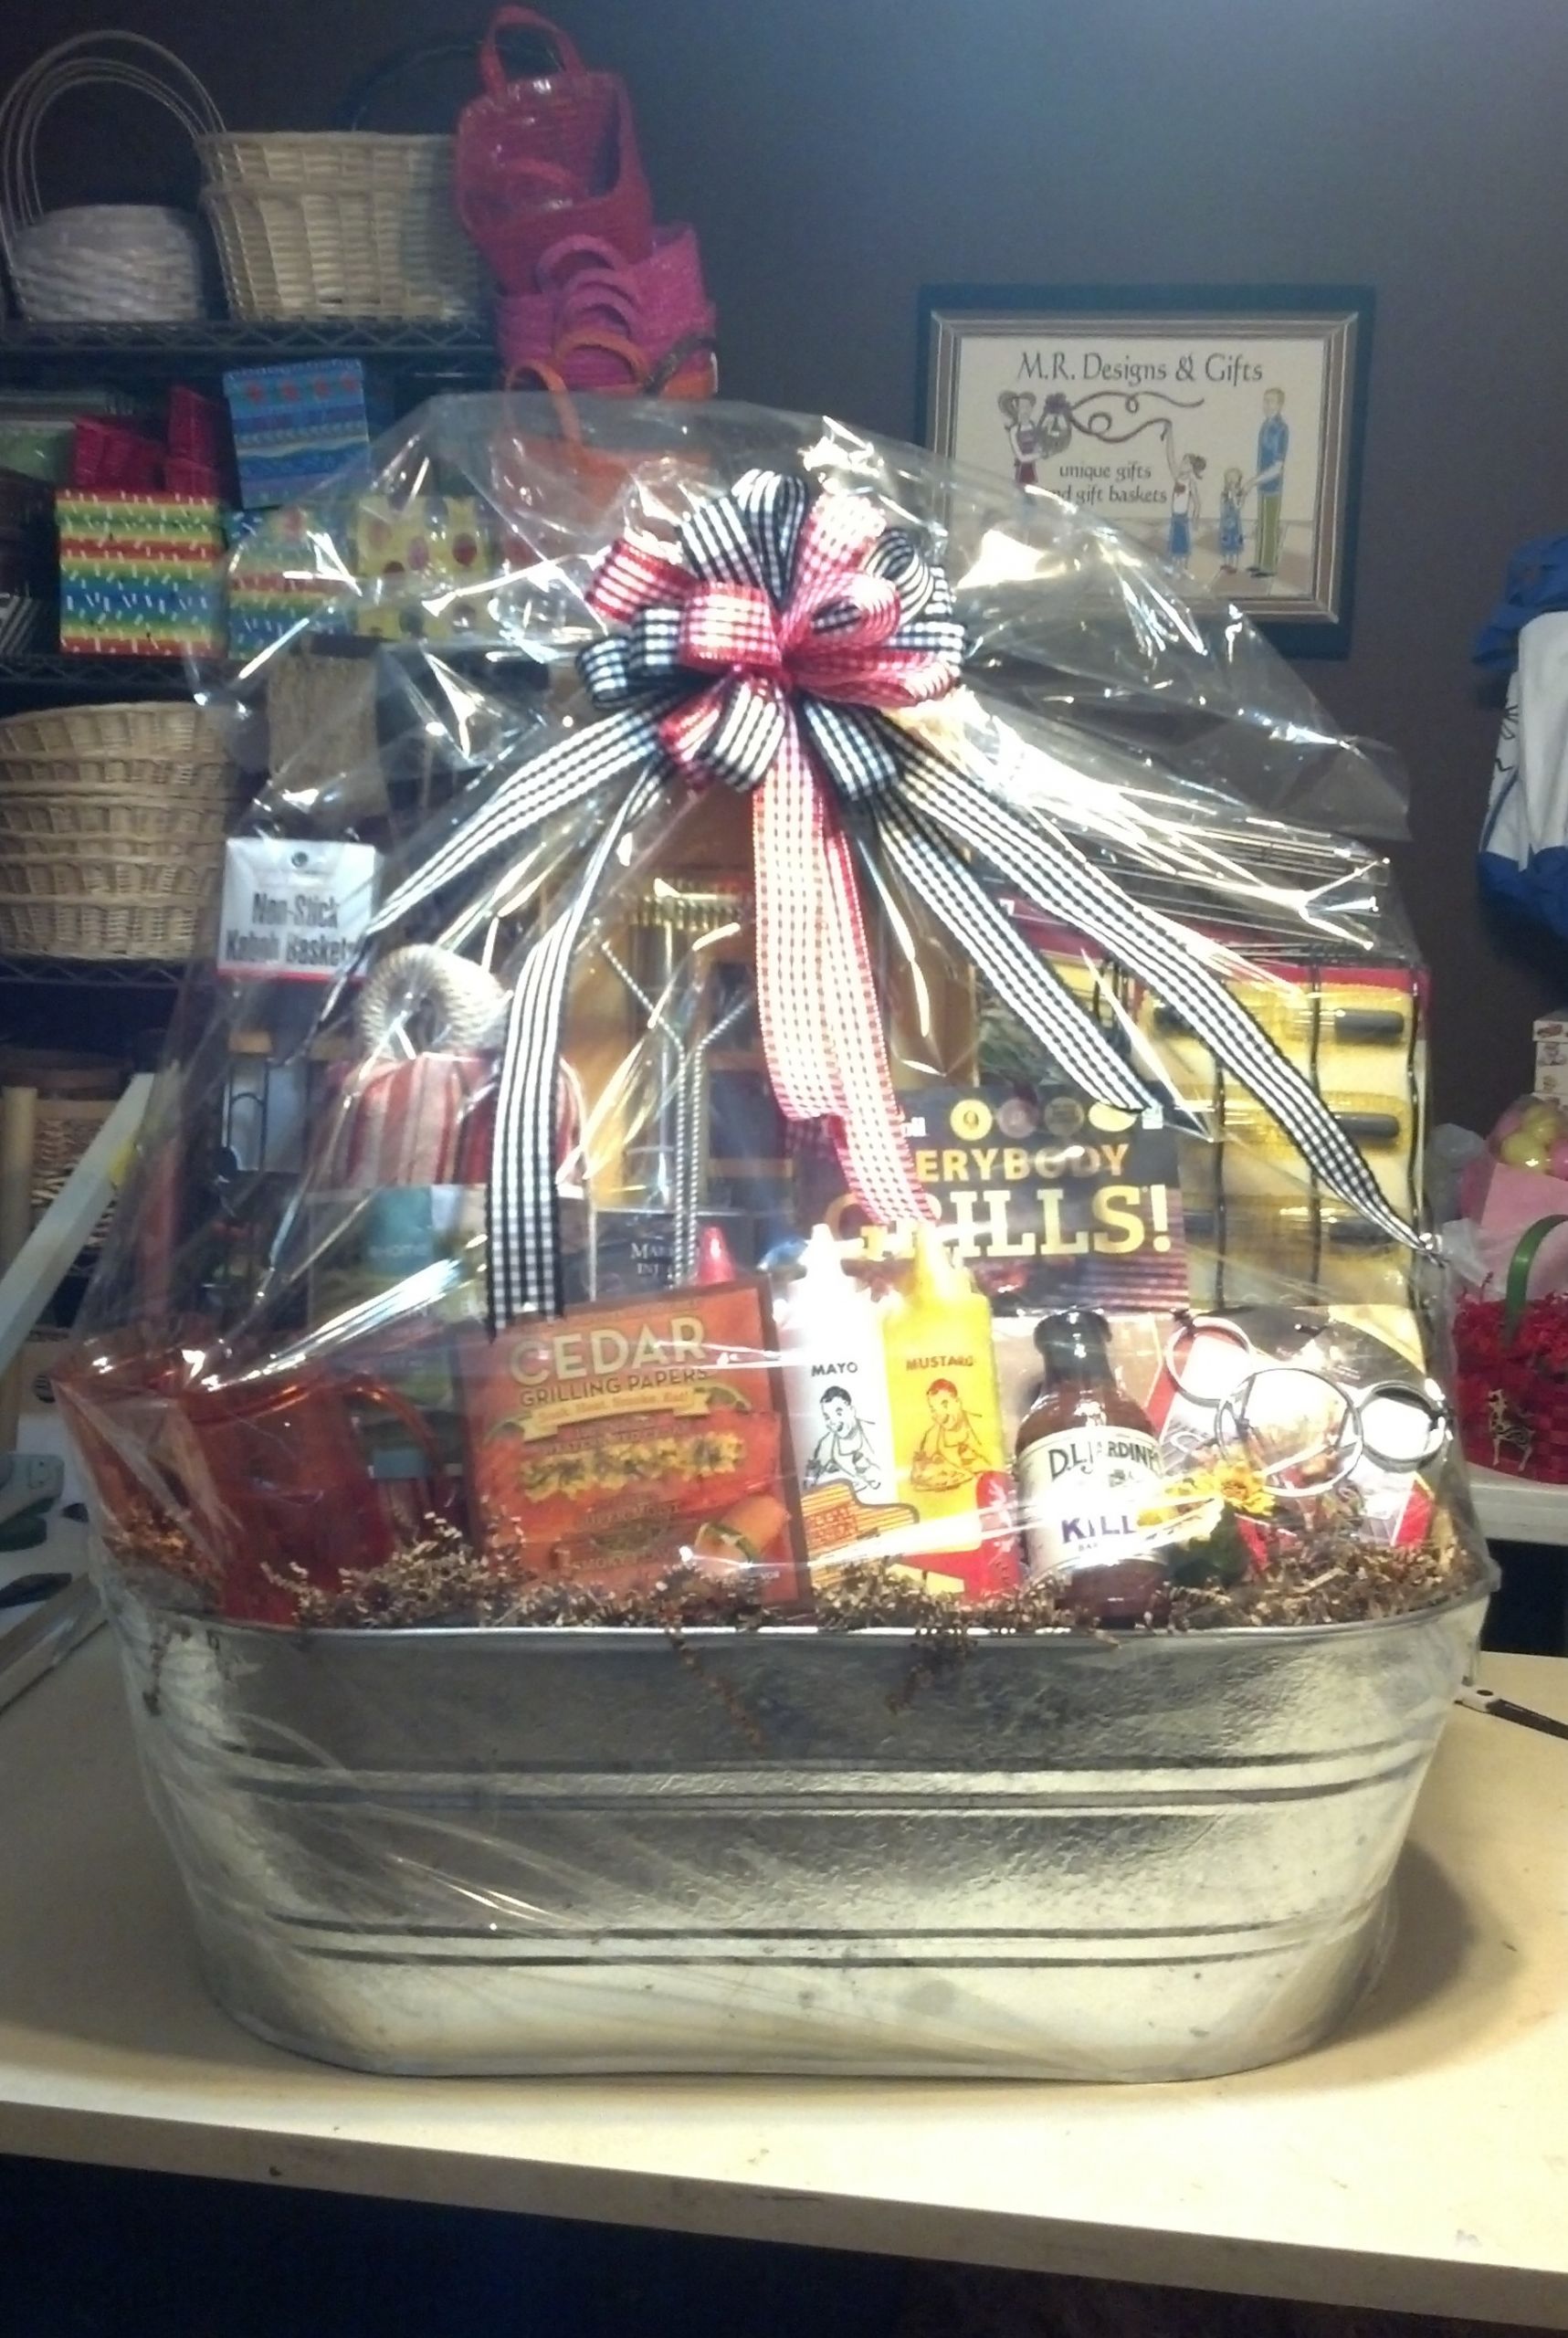 Gift Basket Theme Ideas Fundraiser
 Special Event and Silent Auction Gift Basket Ideas by M R